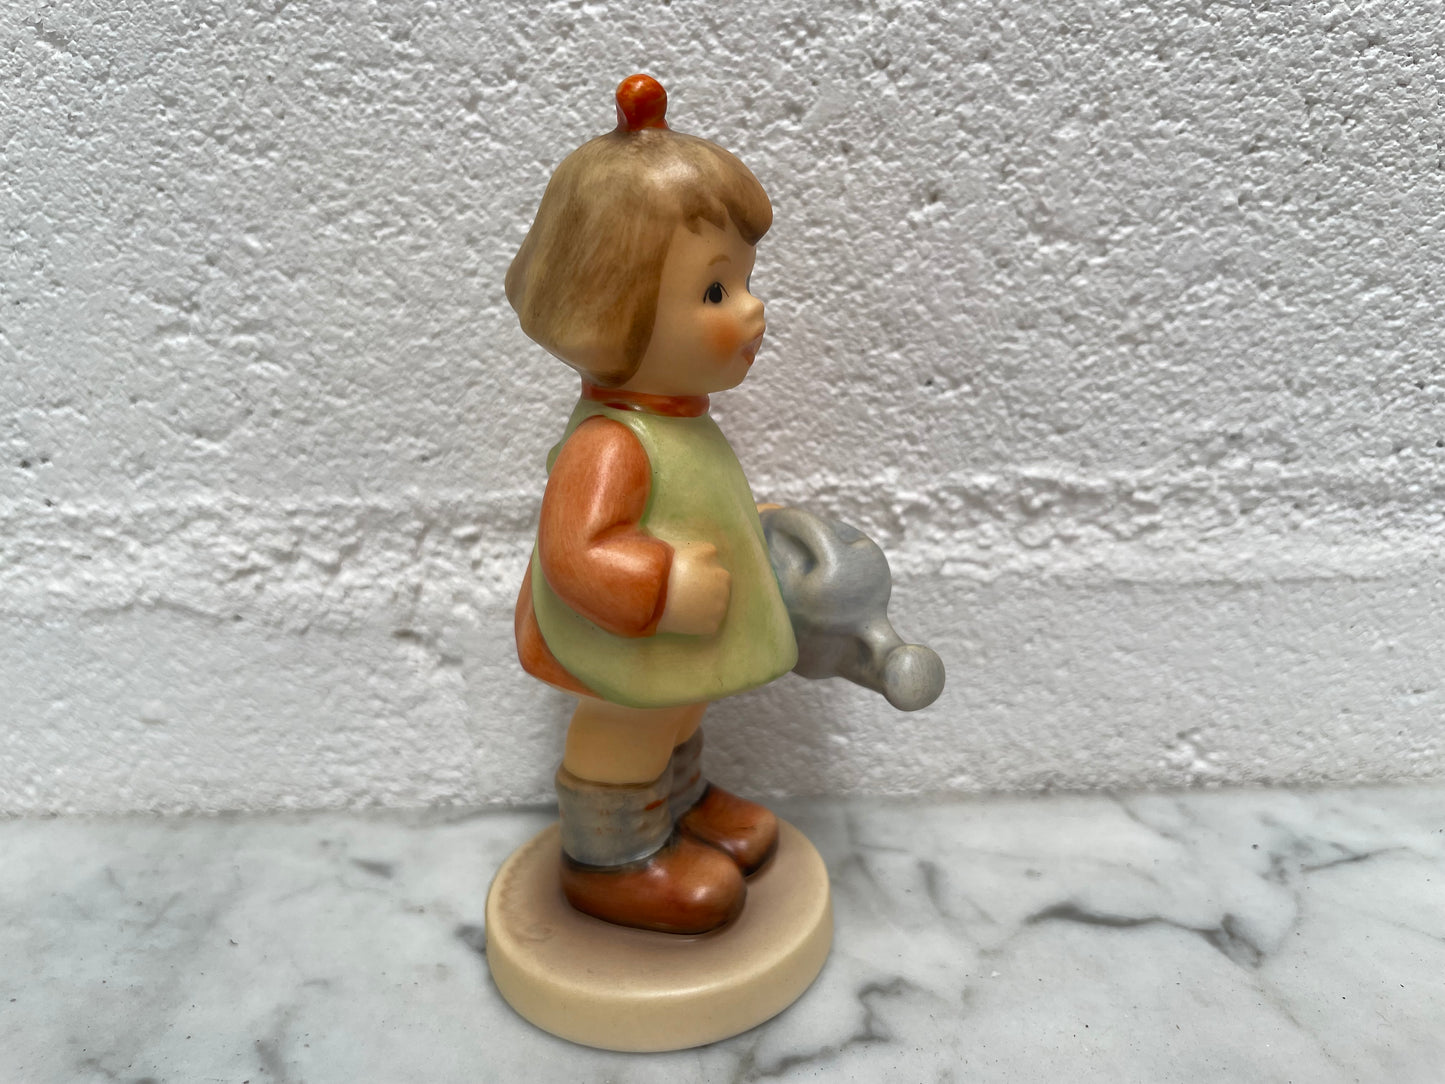 Beautiful Goebel Hummel figurine "Natures Gift" dated 1996, of a girl with her watering can. In good original condition, please see photos as they form part of the description.